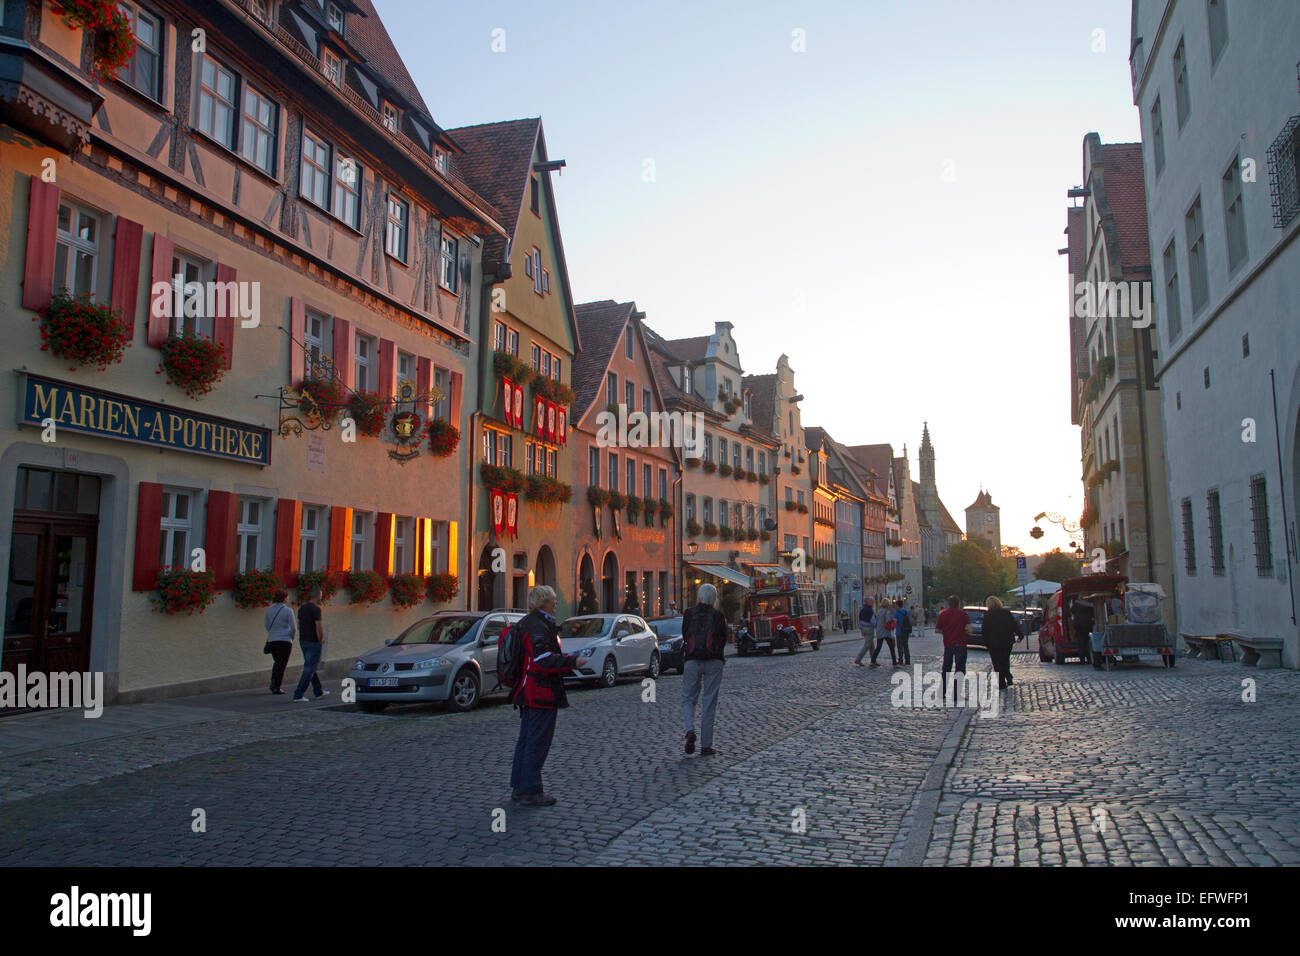 The medieval town of Rothenburg ob der Tauber Stock Photo